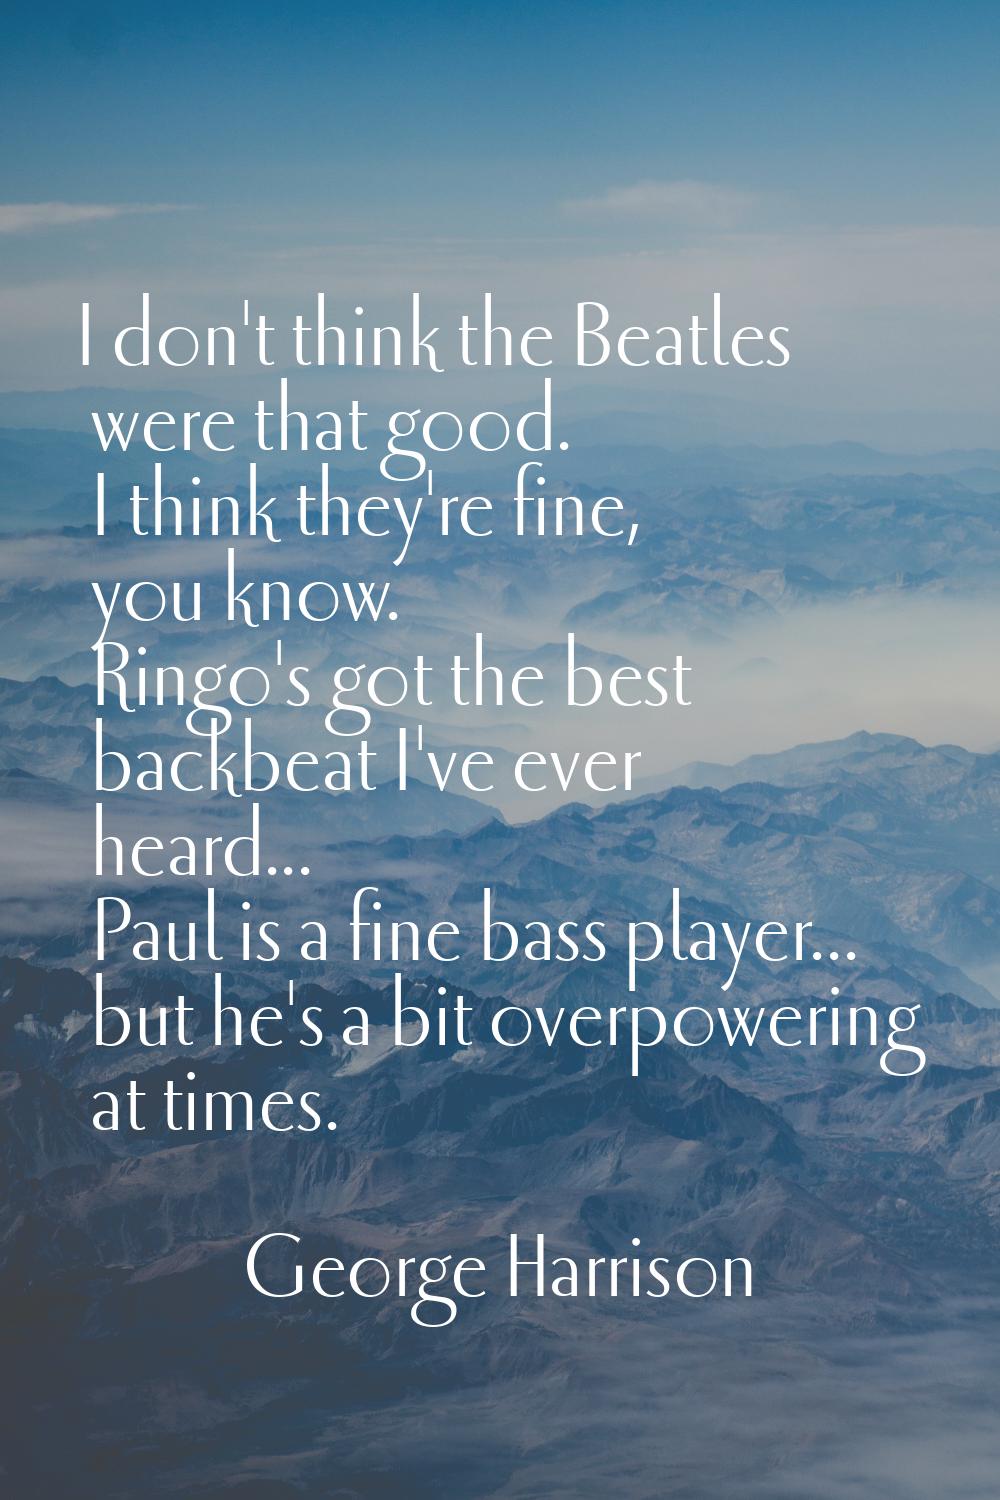 I don't think the Beatles were that good. I think they're fine, you know. Ringo's got the best back